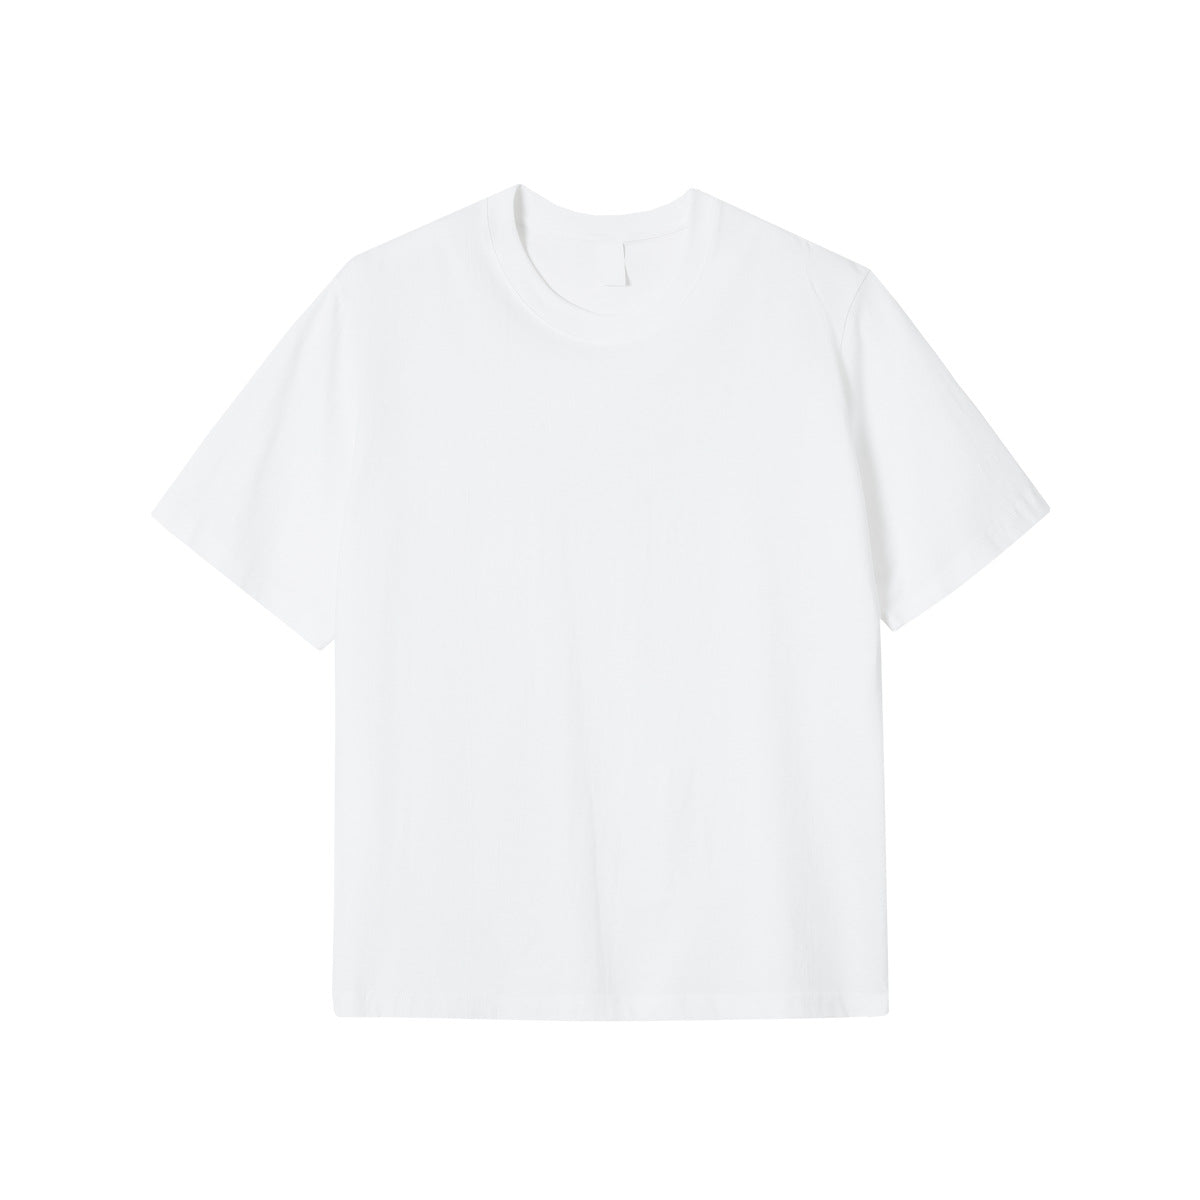 230g Combed Cotton Solid Color Short-sleeved T-shirt Foundation